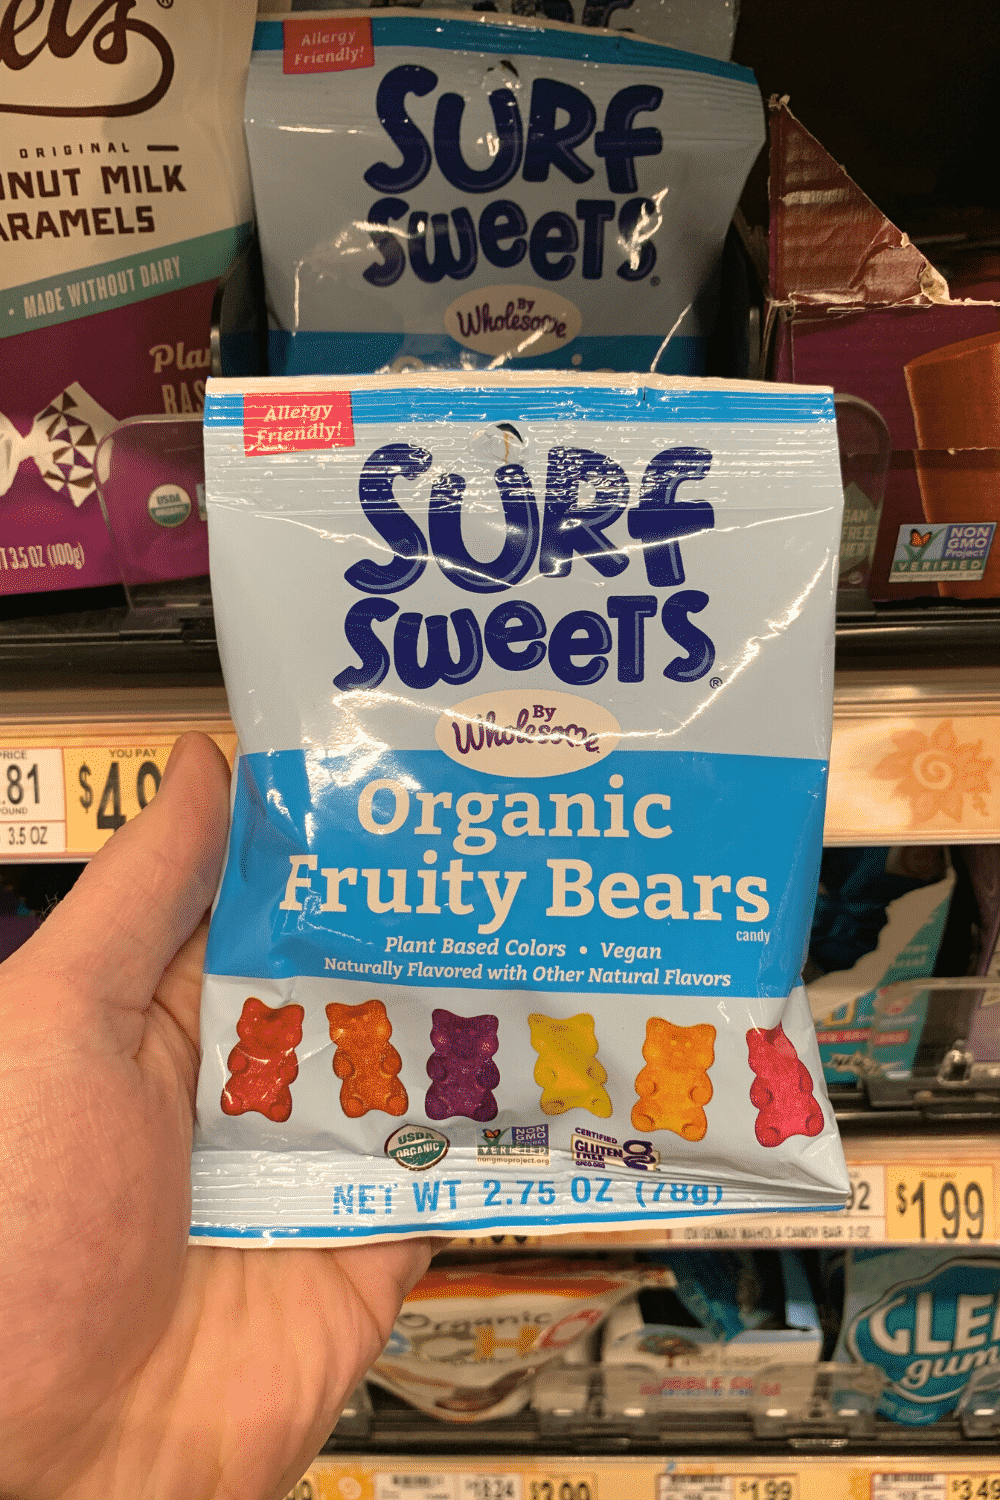 A hand holding a bag of Surf Sweets organic fruity bears